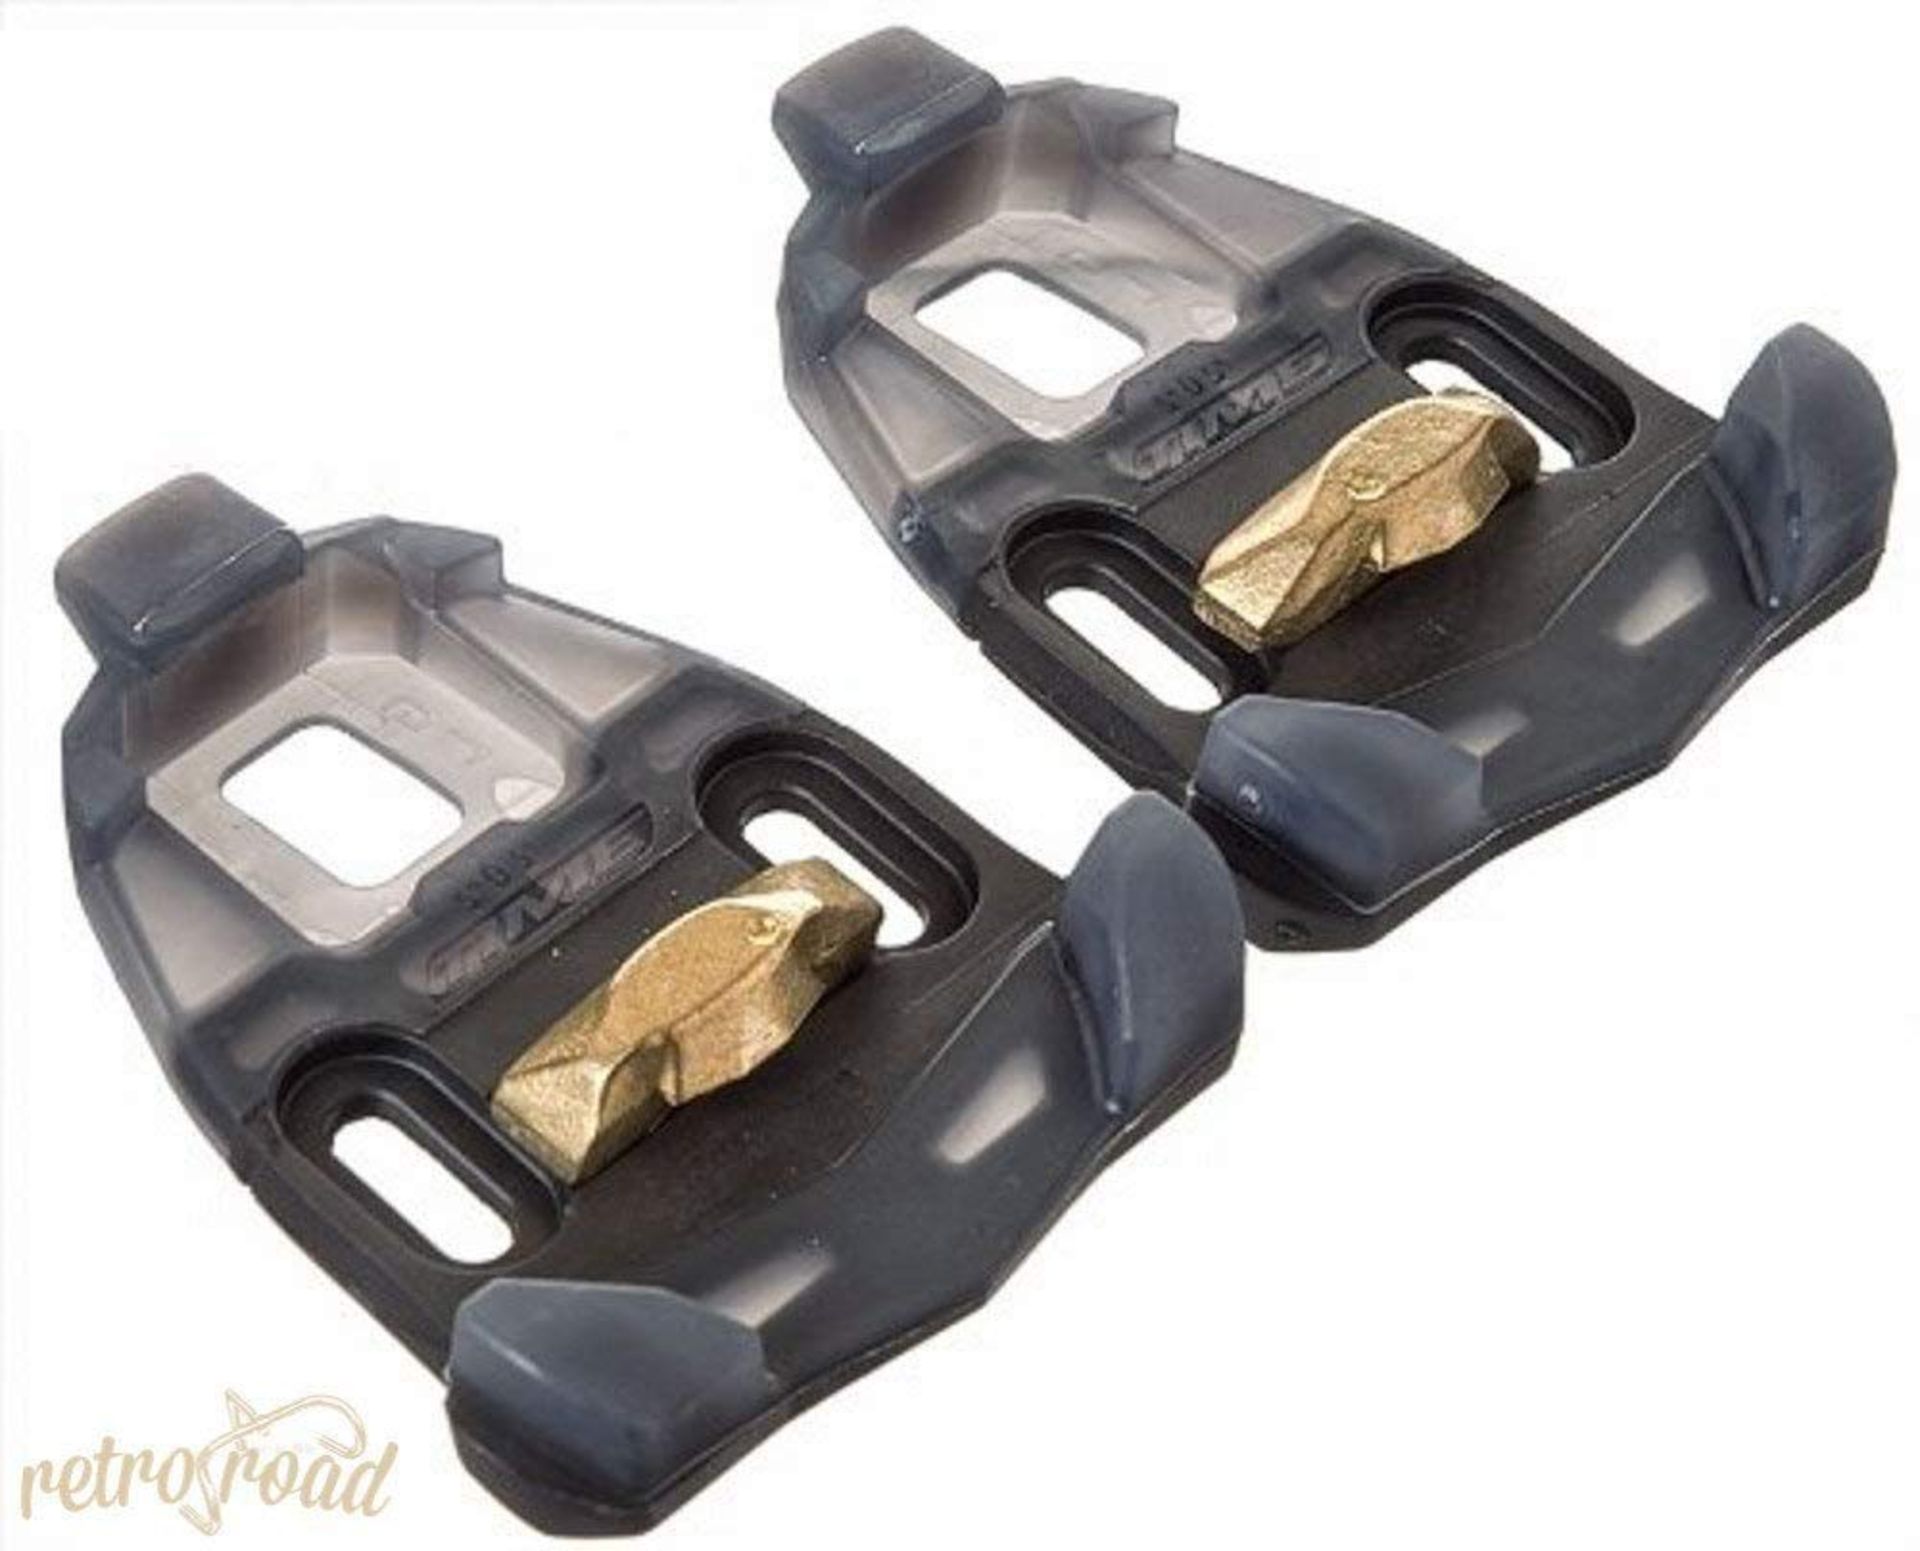 2 x Time RXS Pedal Cleats